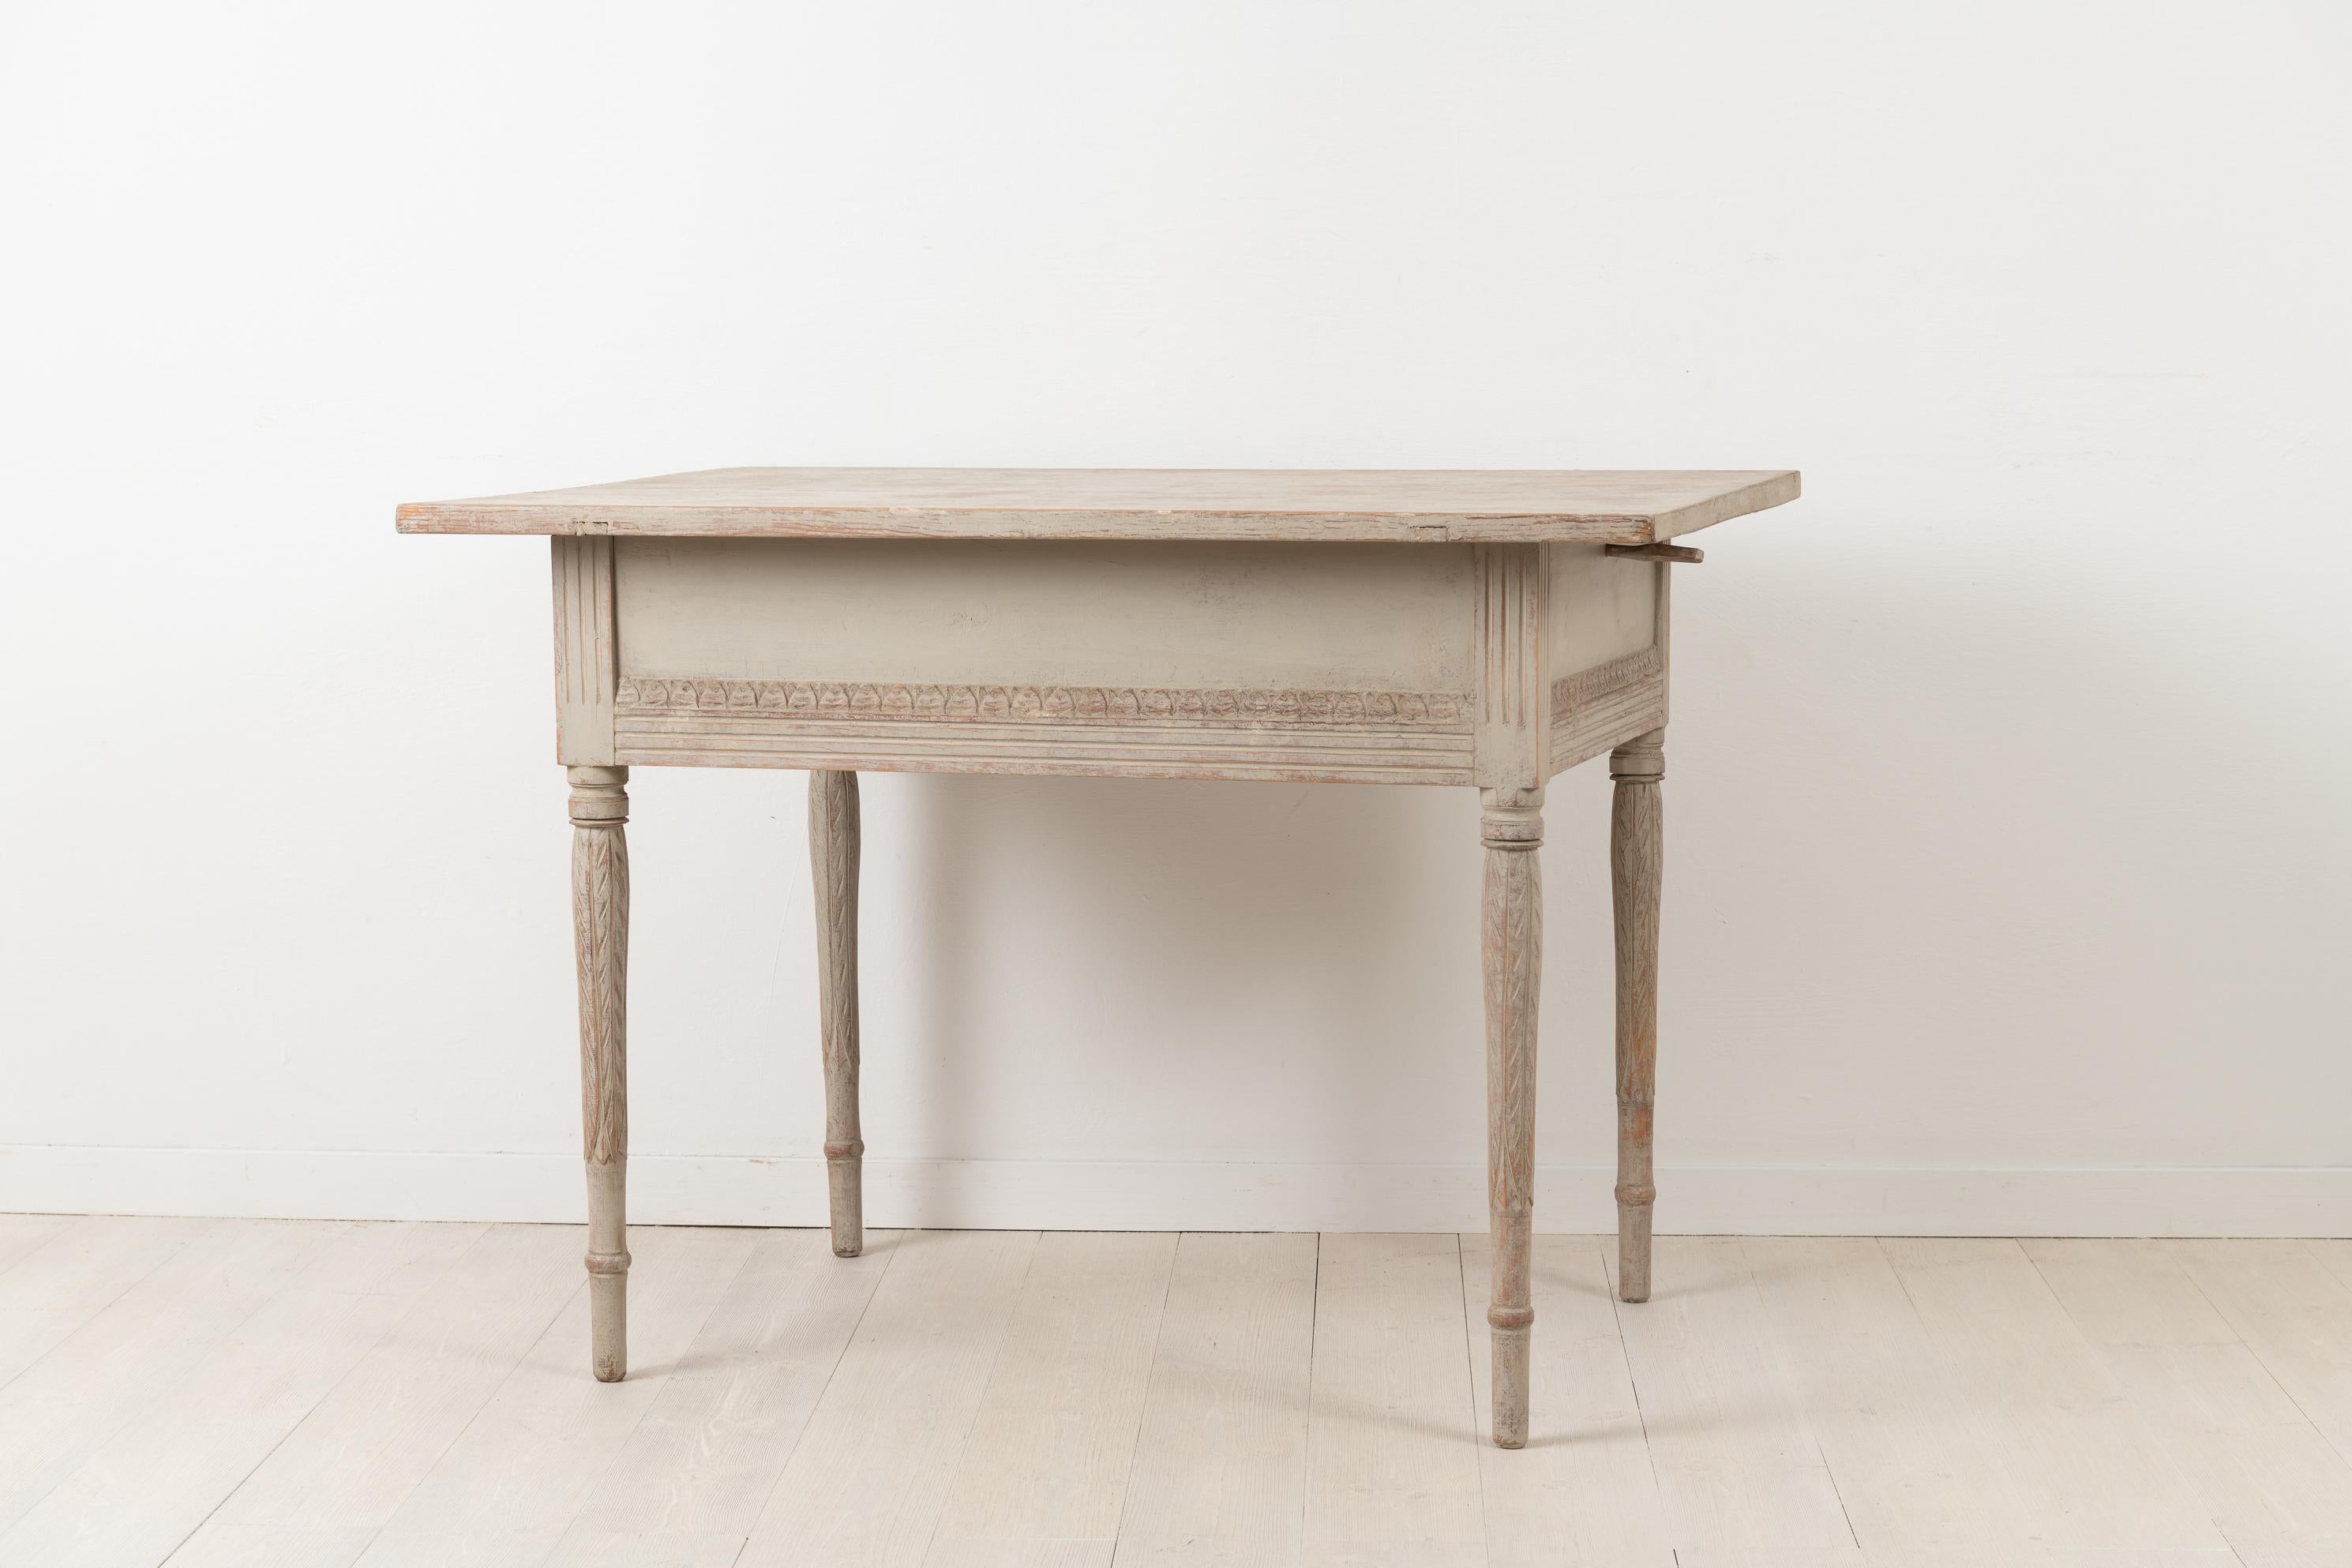 Hand-Crafted 18th Century Swedish Neoclassical Console Table